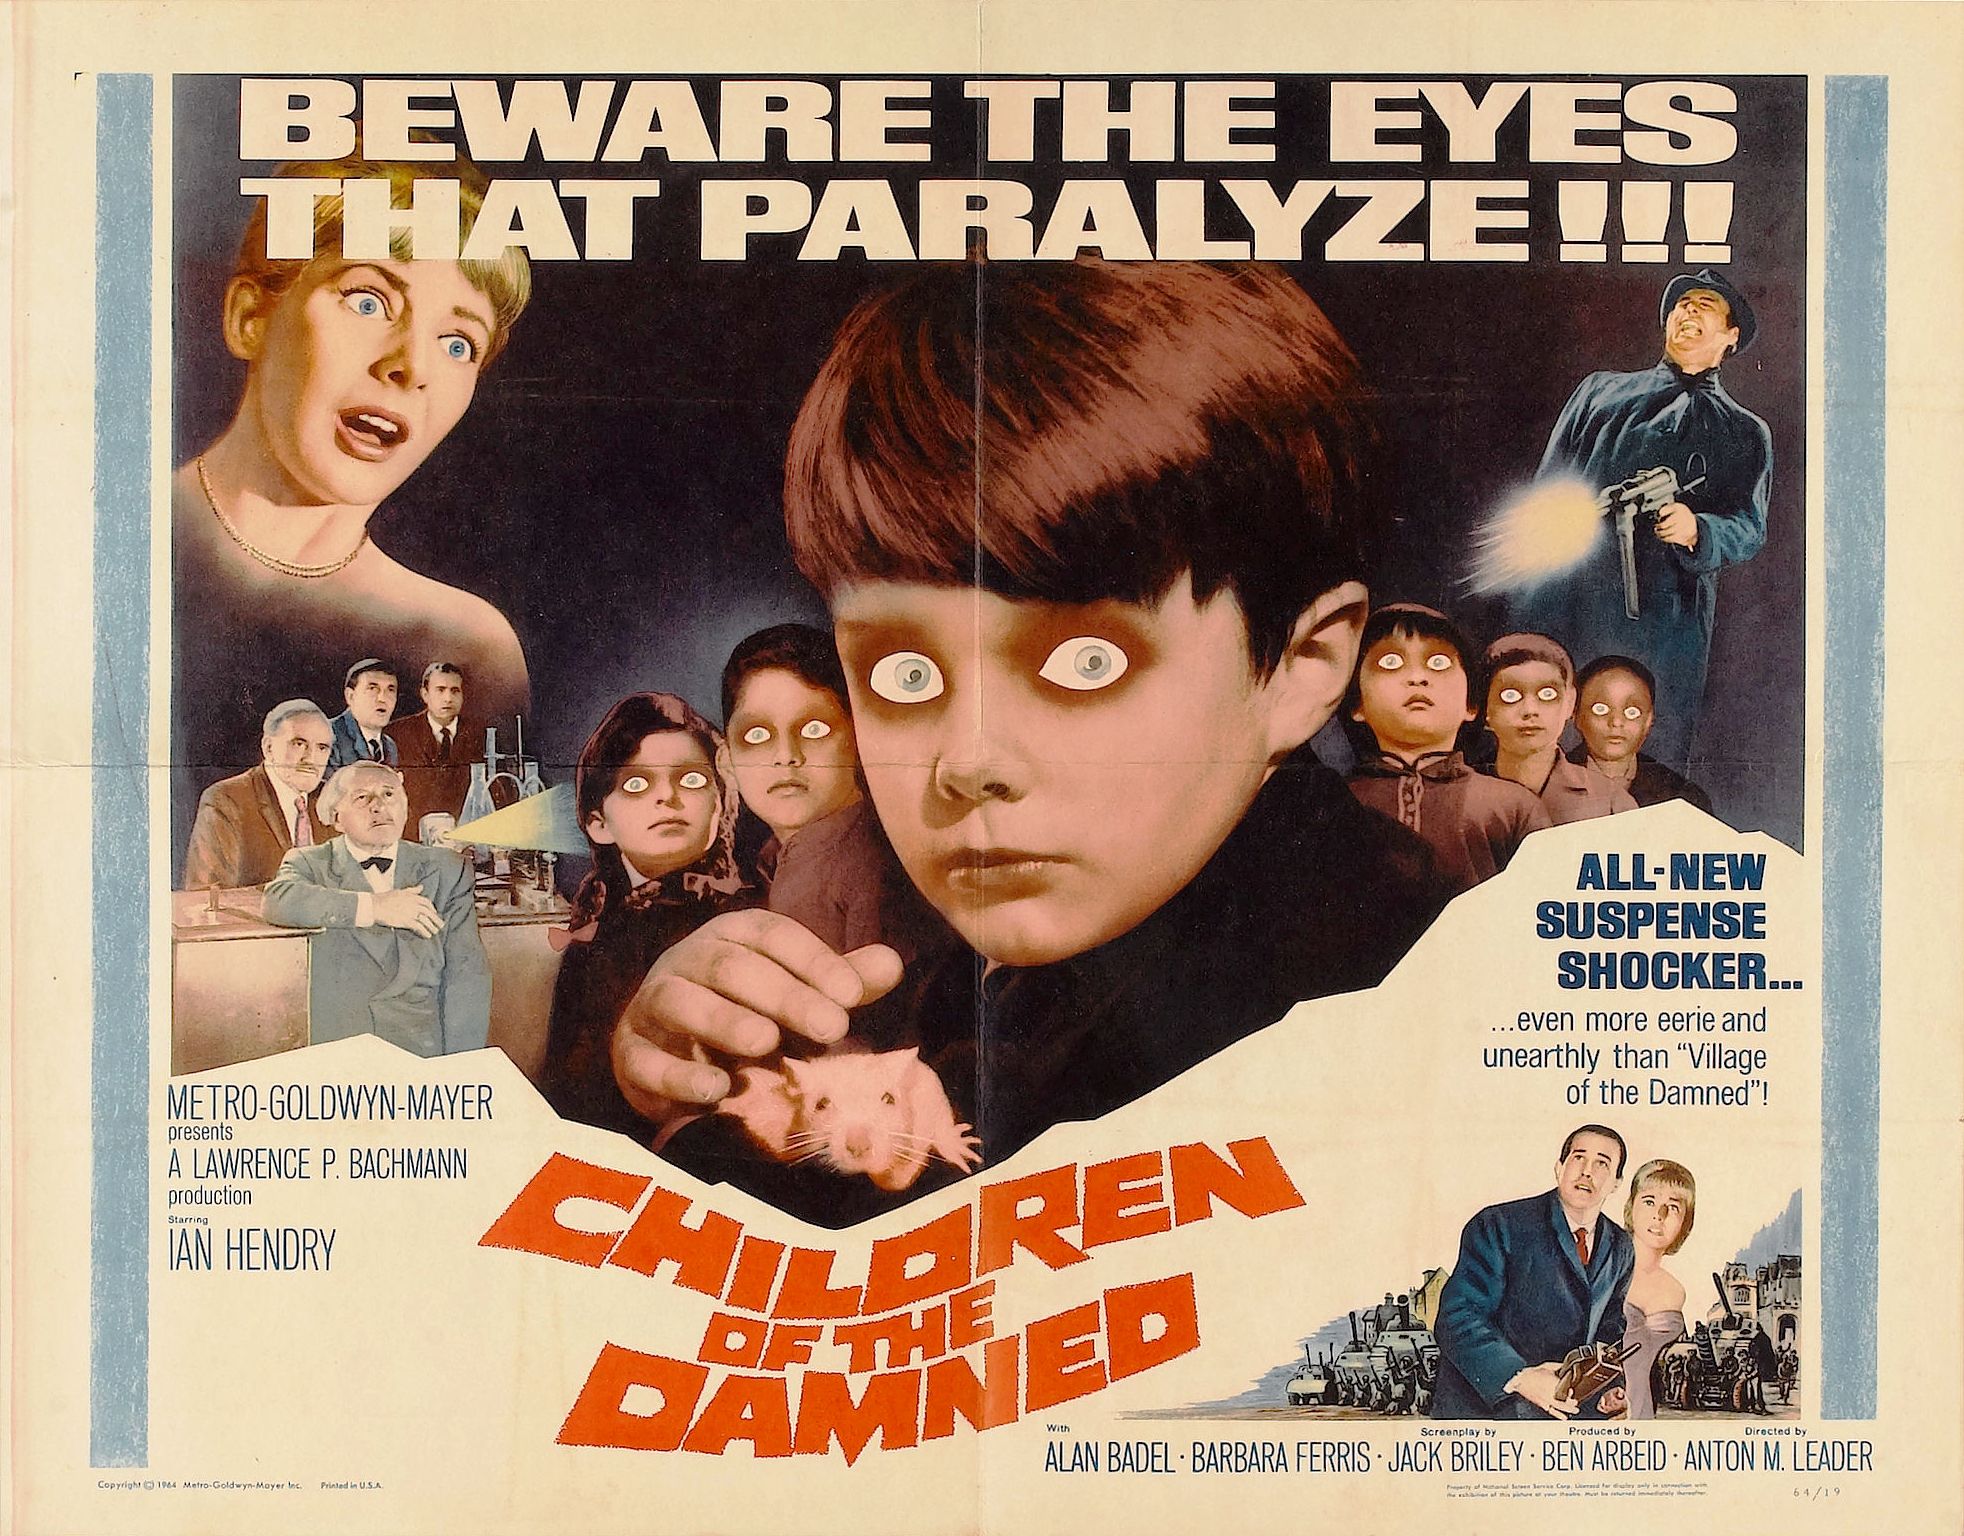 damn of the children - Beware The Eyes That Paralyzeli! AllNew Suspense Shocker... ...even more serie and unearthly than "Village of the Damned" MetroGoldwynMayer A Lawrence P Bachmann Jan Hendry Ren Amed Alan Bace. Barbara Ferris Jack BrileyBen Arbeid An